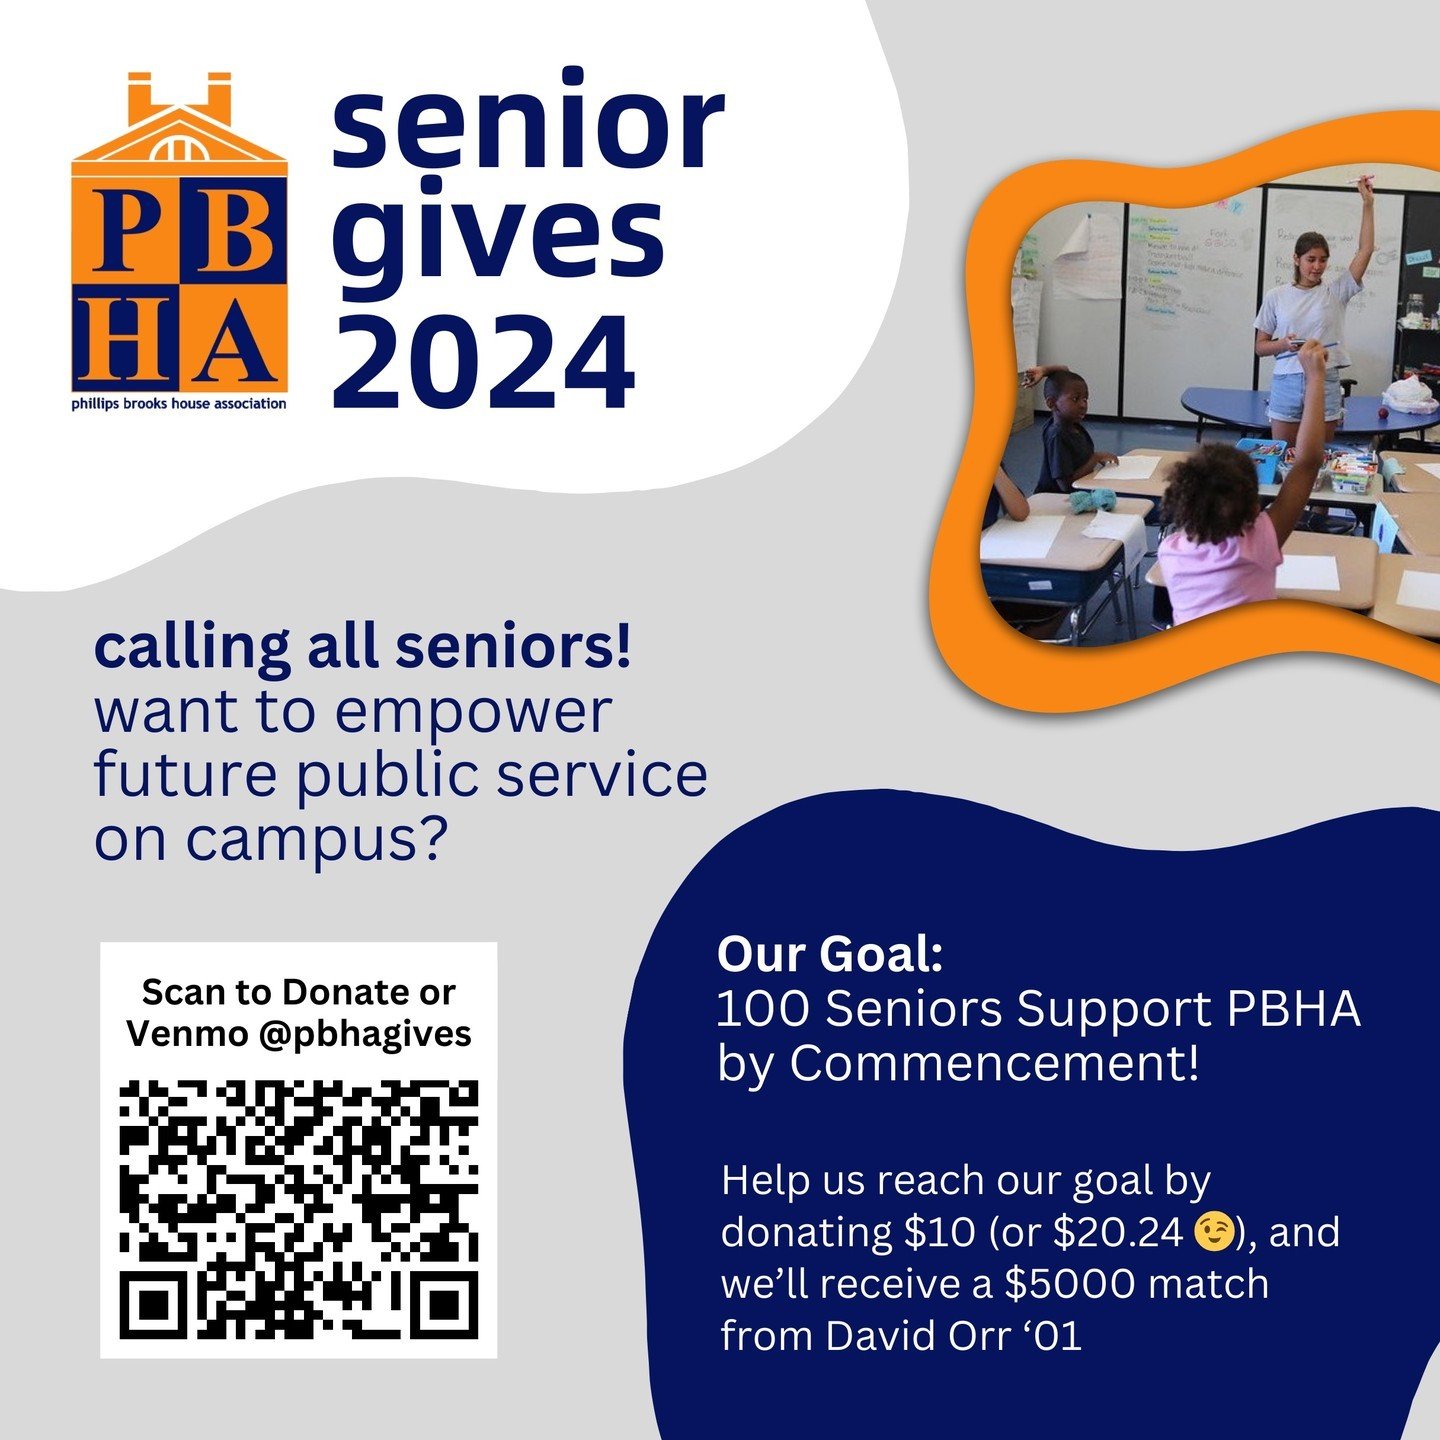 Calling all seniors! Want to empower future public service on campus? 

Help us achieve our Senior Gives 2024 goal! 📚 This year, our goal is for 100 seniors to donate $20.24 (or at least $10) to PBHA before they graduate!

You can donate through the